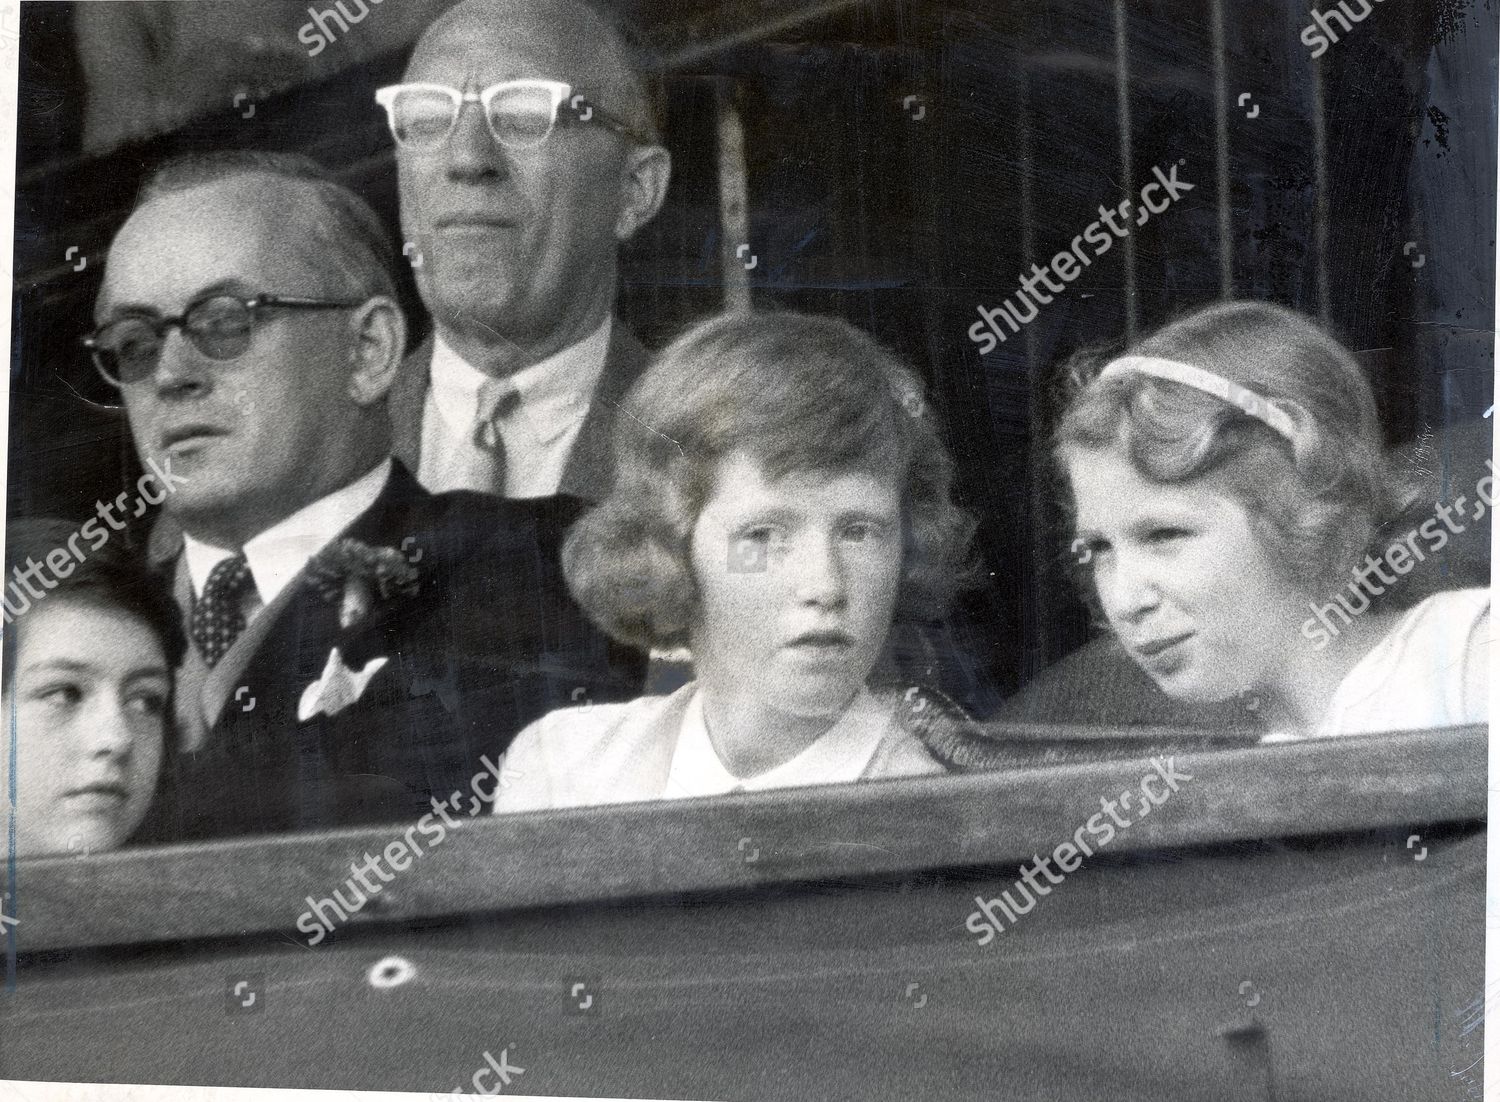 princess-anne-now-princess-royal-july-1961-princess-anne-is-pictured-at-wimbledon-with-her-friends-susan-babington-smith-and-caroline-hamilton-watching-mike-sangster-become-the-first-british-player-in-23-years-to-reach-the-semi-final-of-the-mens-shutterstock-editorial-1030938a.jpg